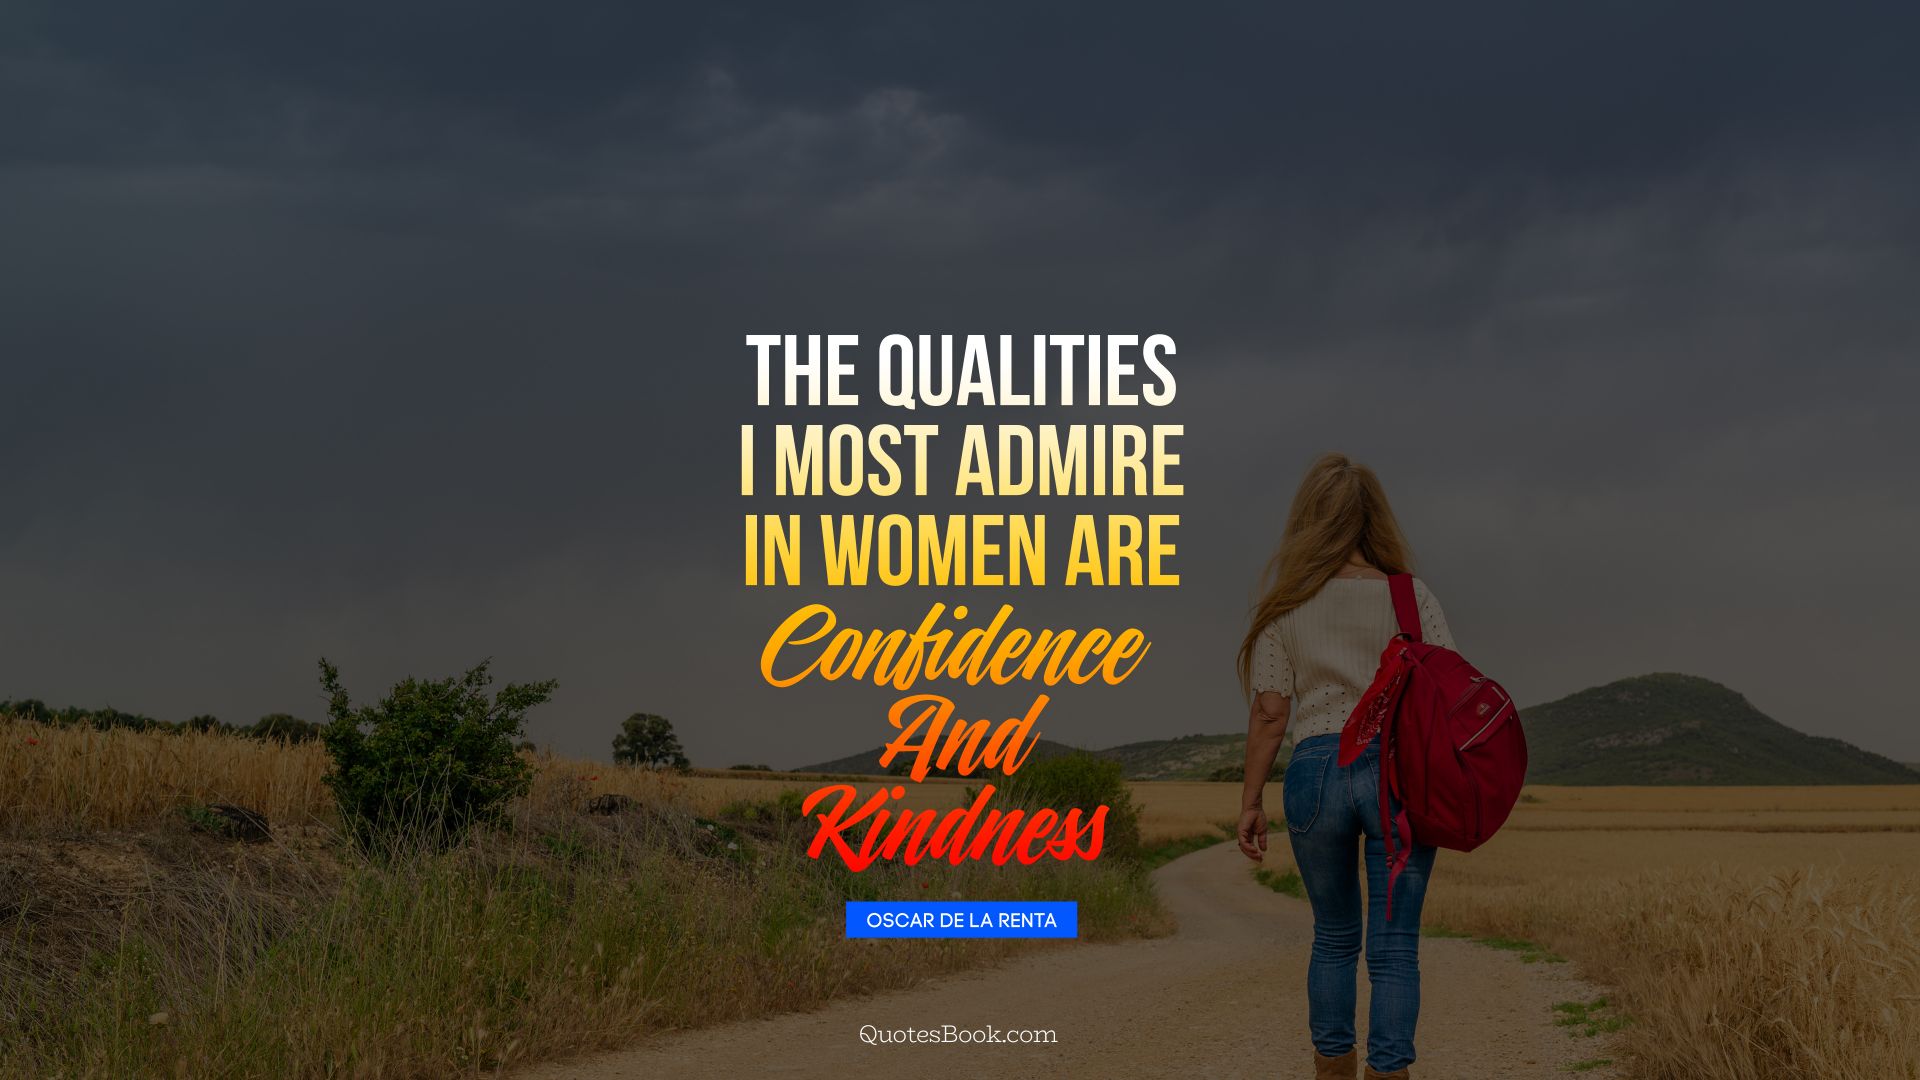 The qualities I most admire in women are confidence and kindness. - Quote by Oscar de la Renta